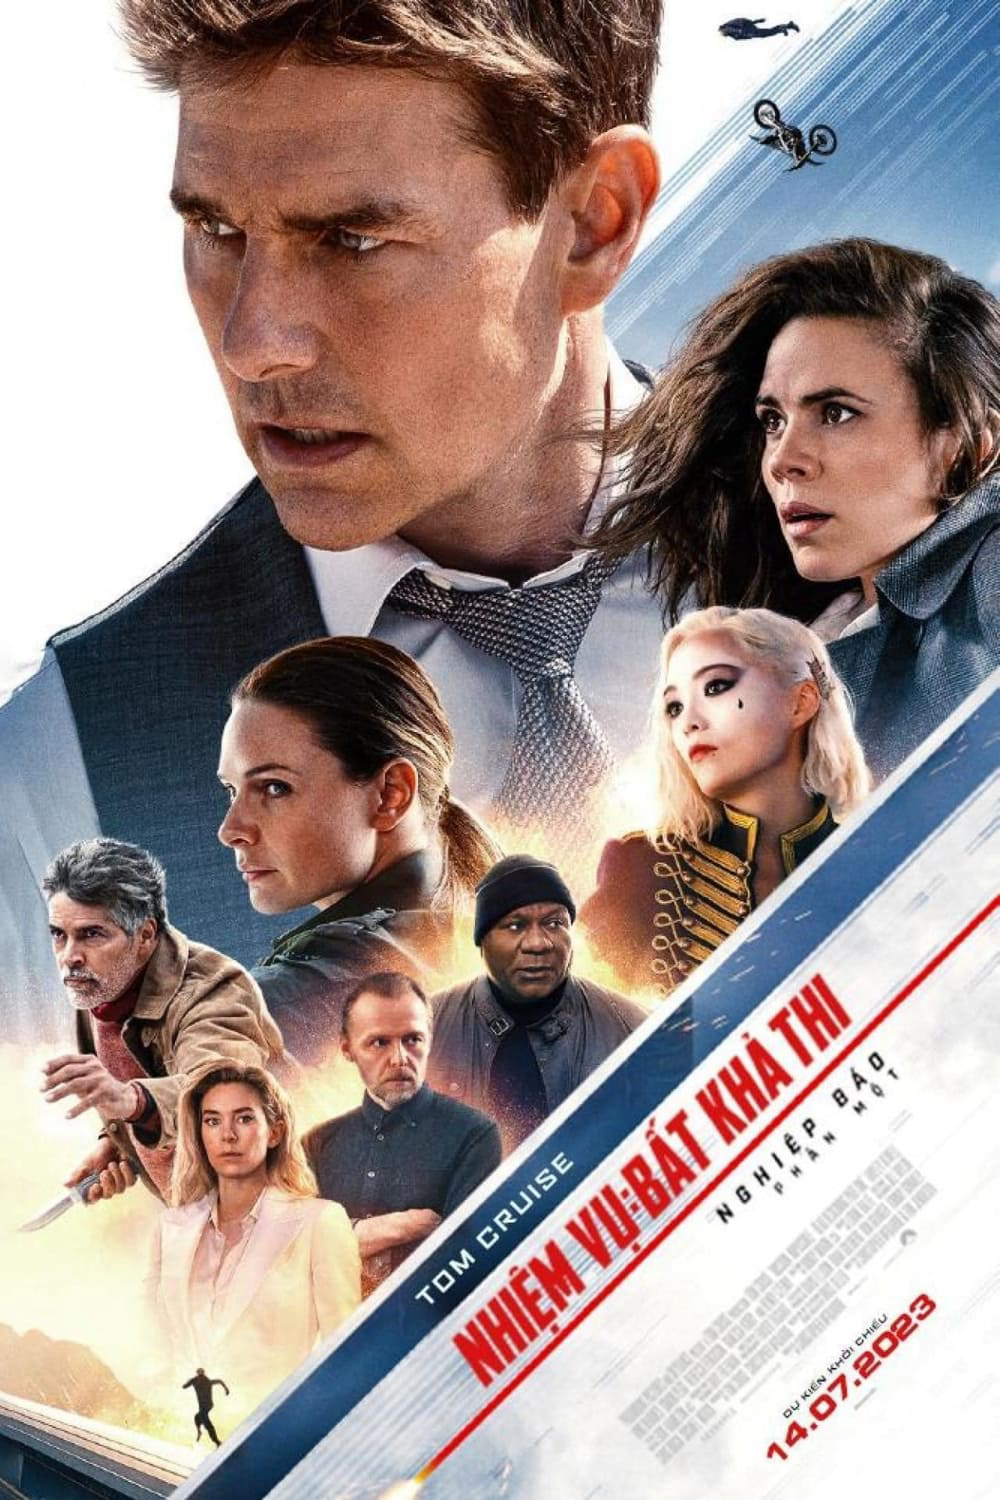 Poster Phim Nhiệm Vụ Bất Khả Thi 7 - Nghiệp Báo Phần 1 (Mission: Impossible - Dead Reckoning Part One)